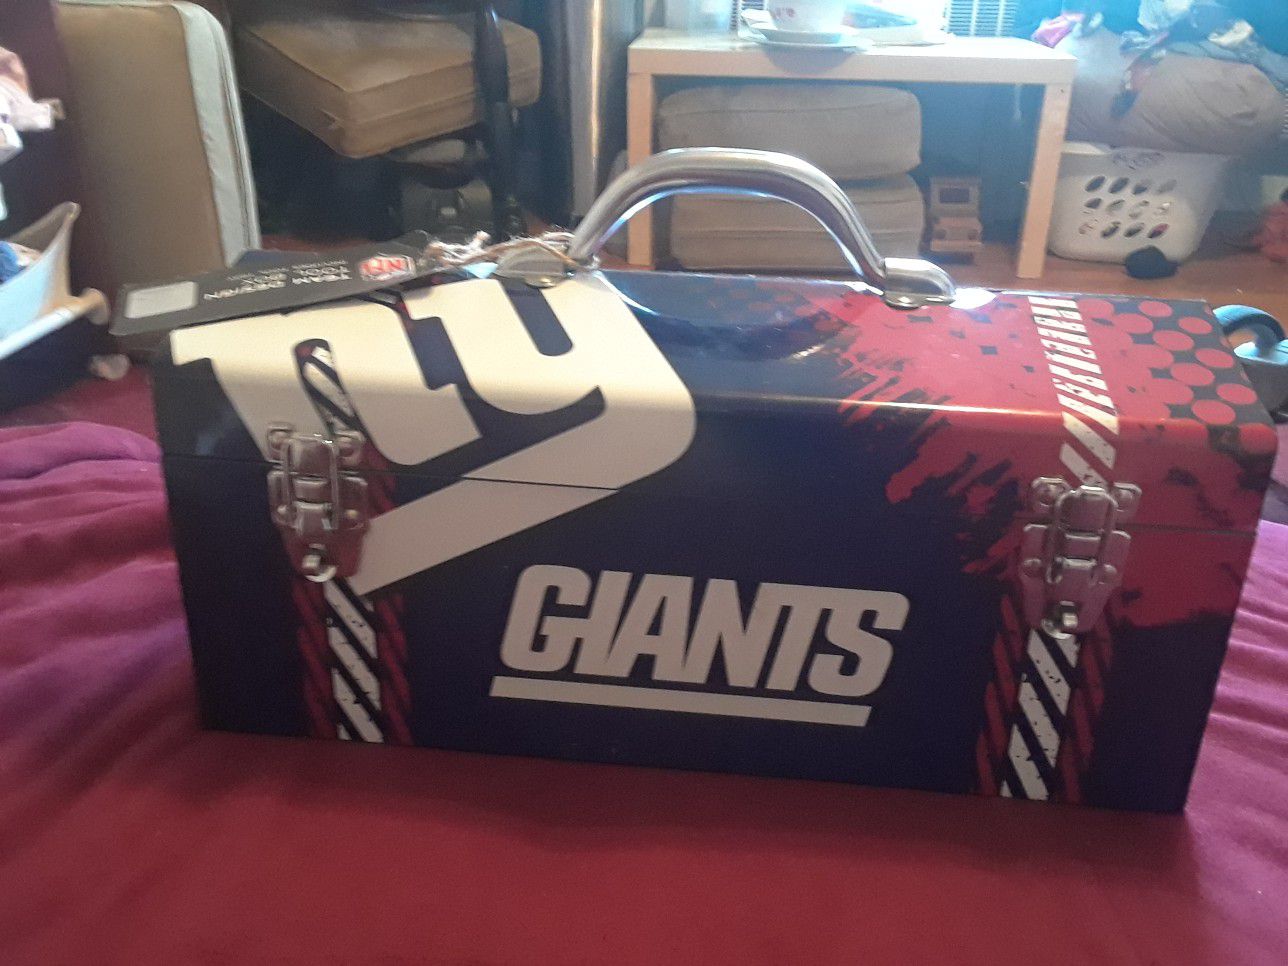 i have this new York giants box you can used for put your tool or your fishing stuff...hablo español